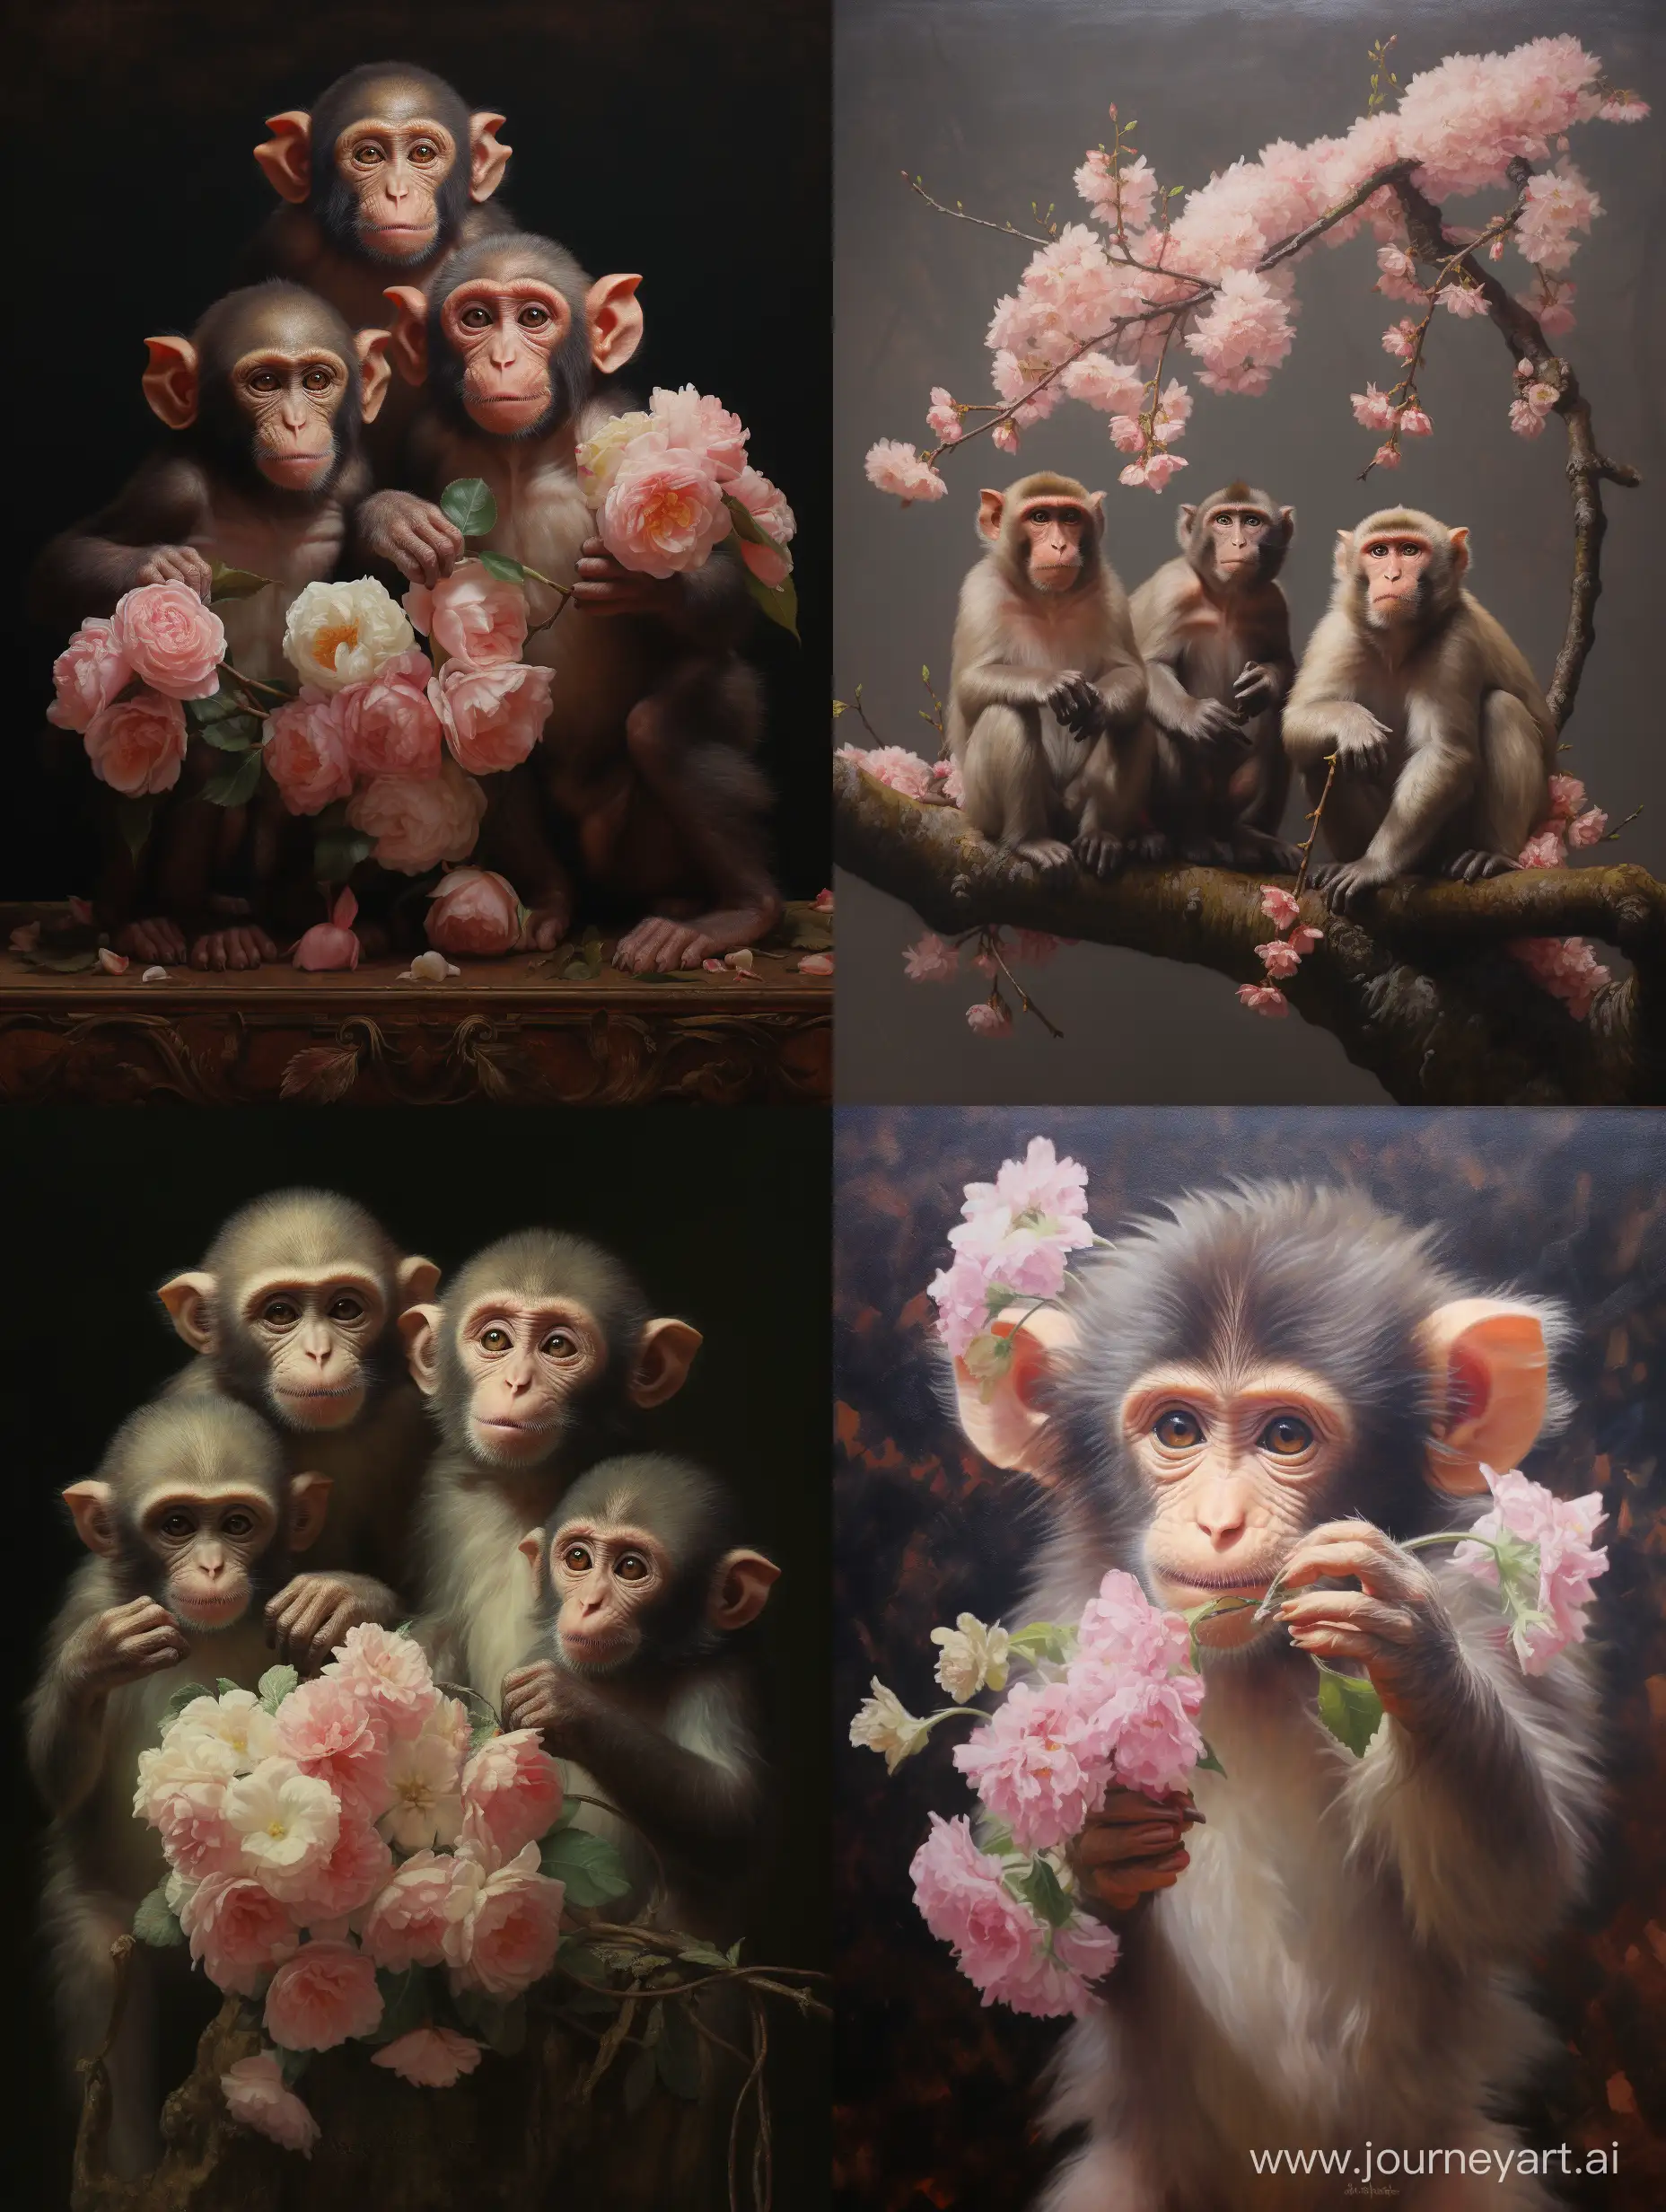 Monkeys-Exchanging-Flowers-in-a-Playful-Scene